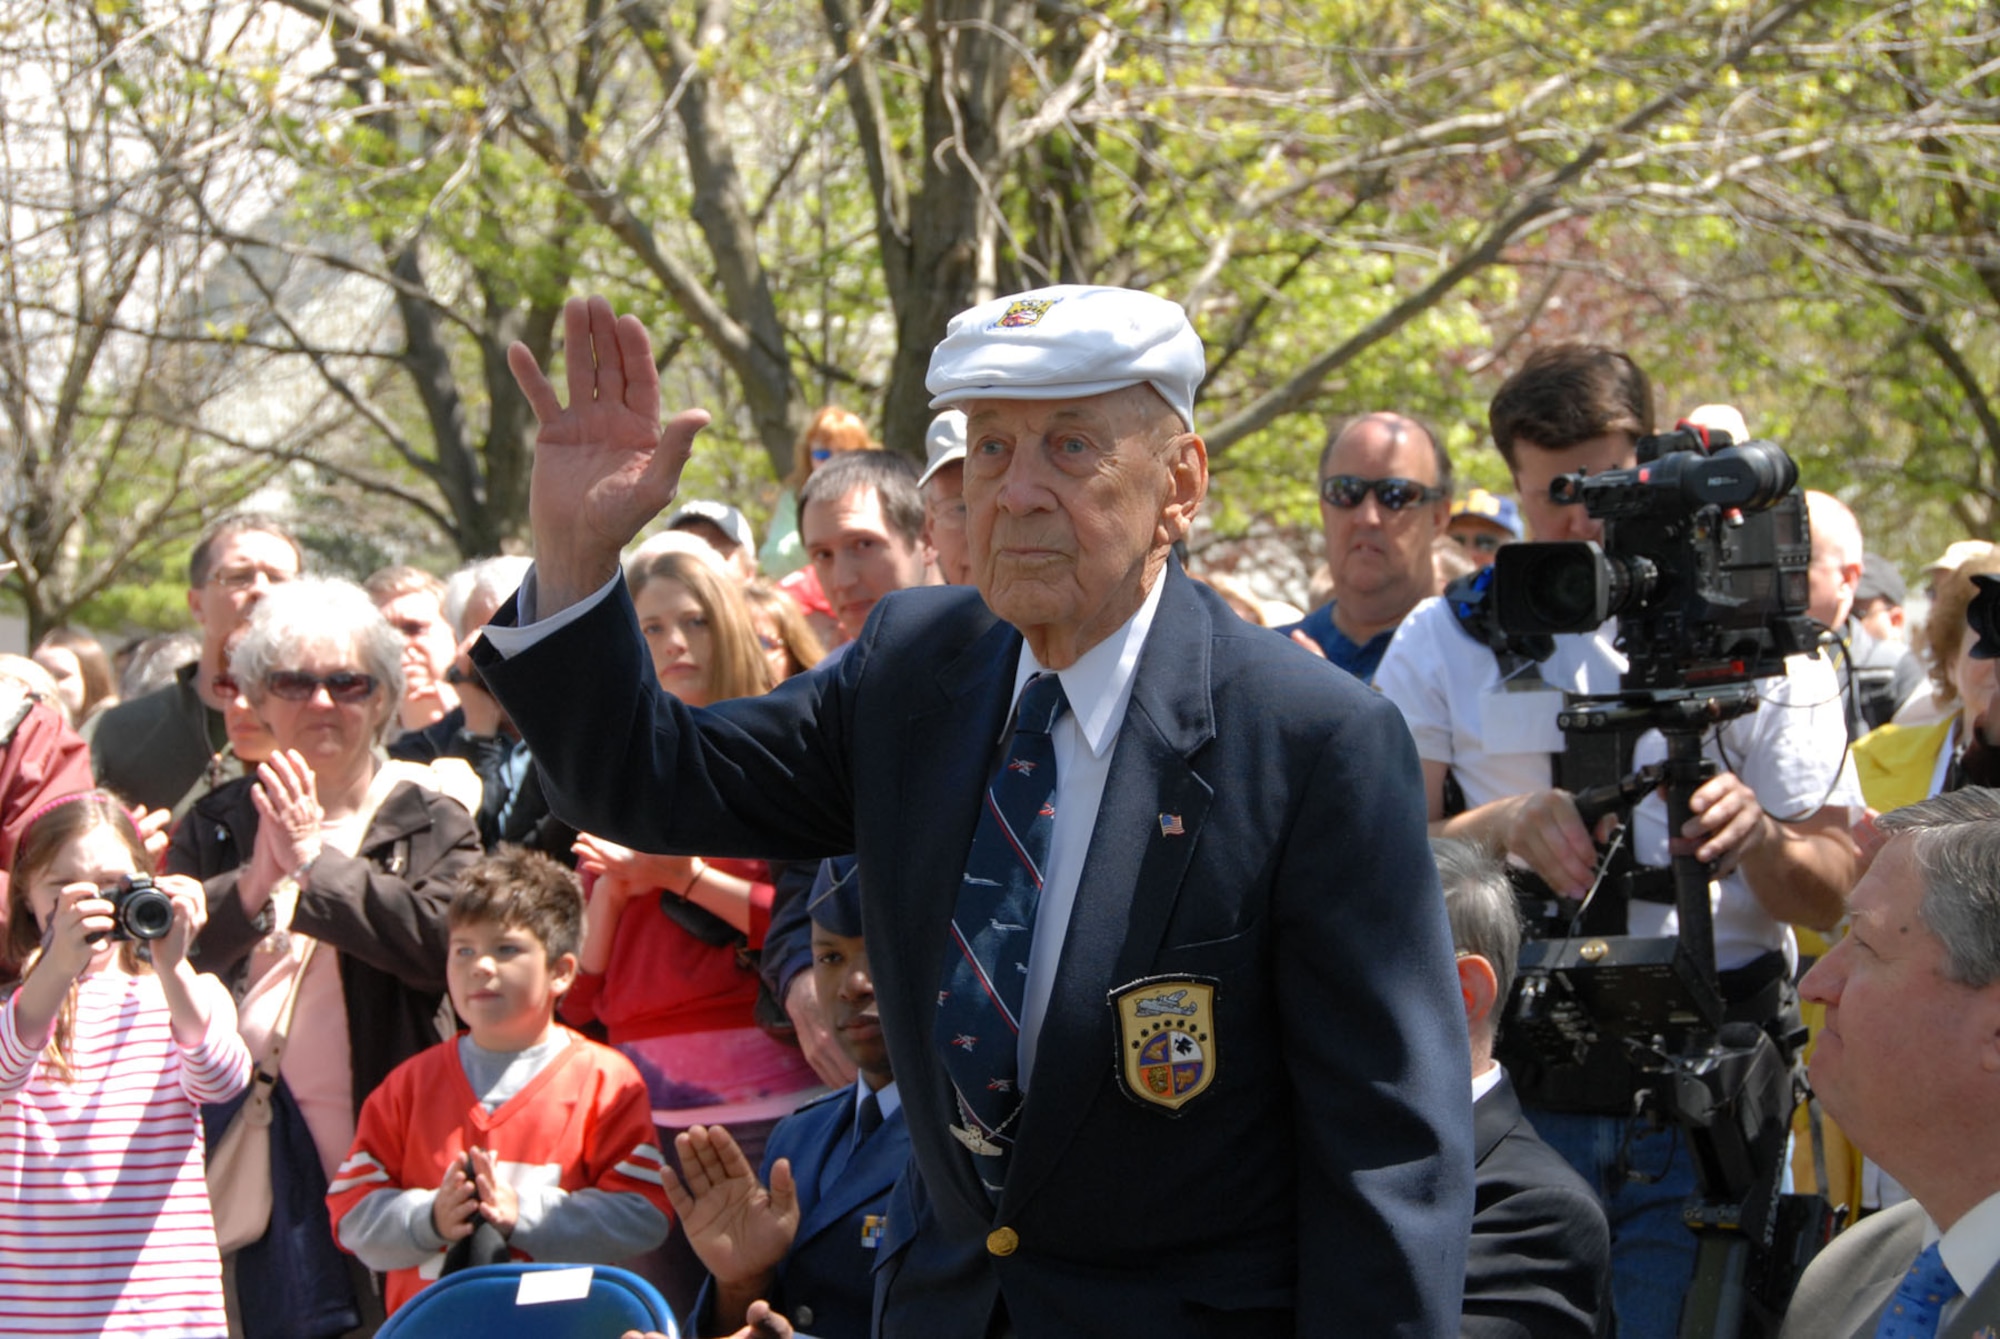 DAYTON, Ohio (04/2010) -- Lt. Col. Richard E. Cole, one of the Doolittle Tokyo Raiders, is recognized during a memorial service in honor of the Raider's 68th reunion, which was held at the National Museum of the U.S. Air Force on April 16-18. (U.S. Air Force photo by Jeff Fisher)